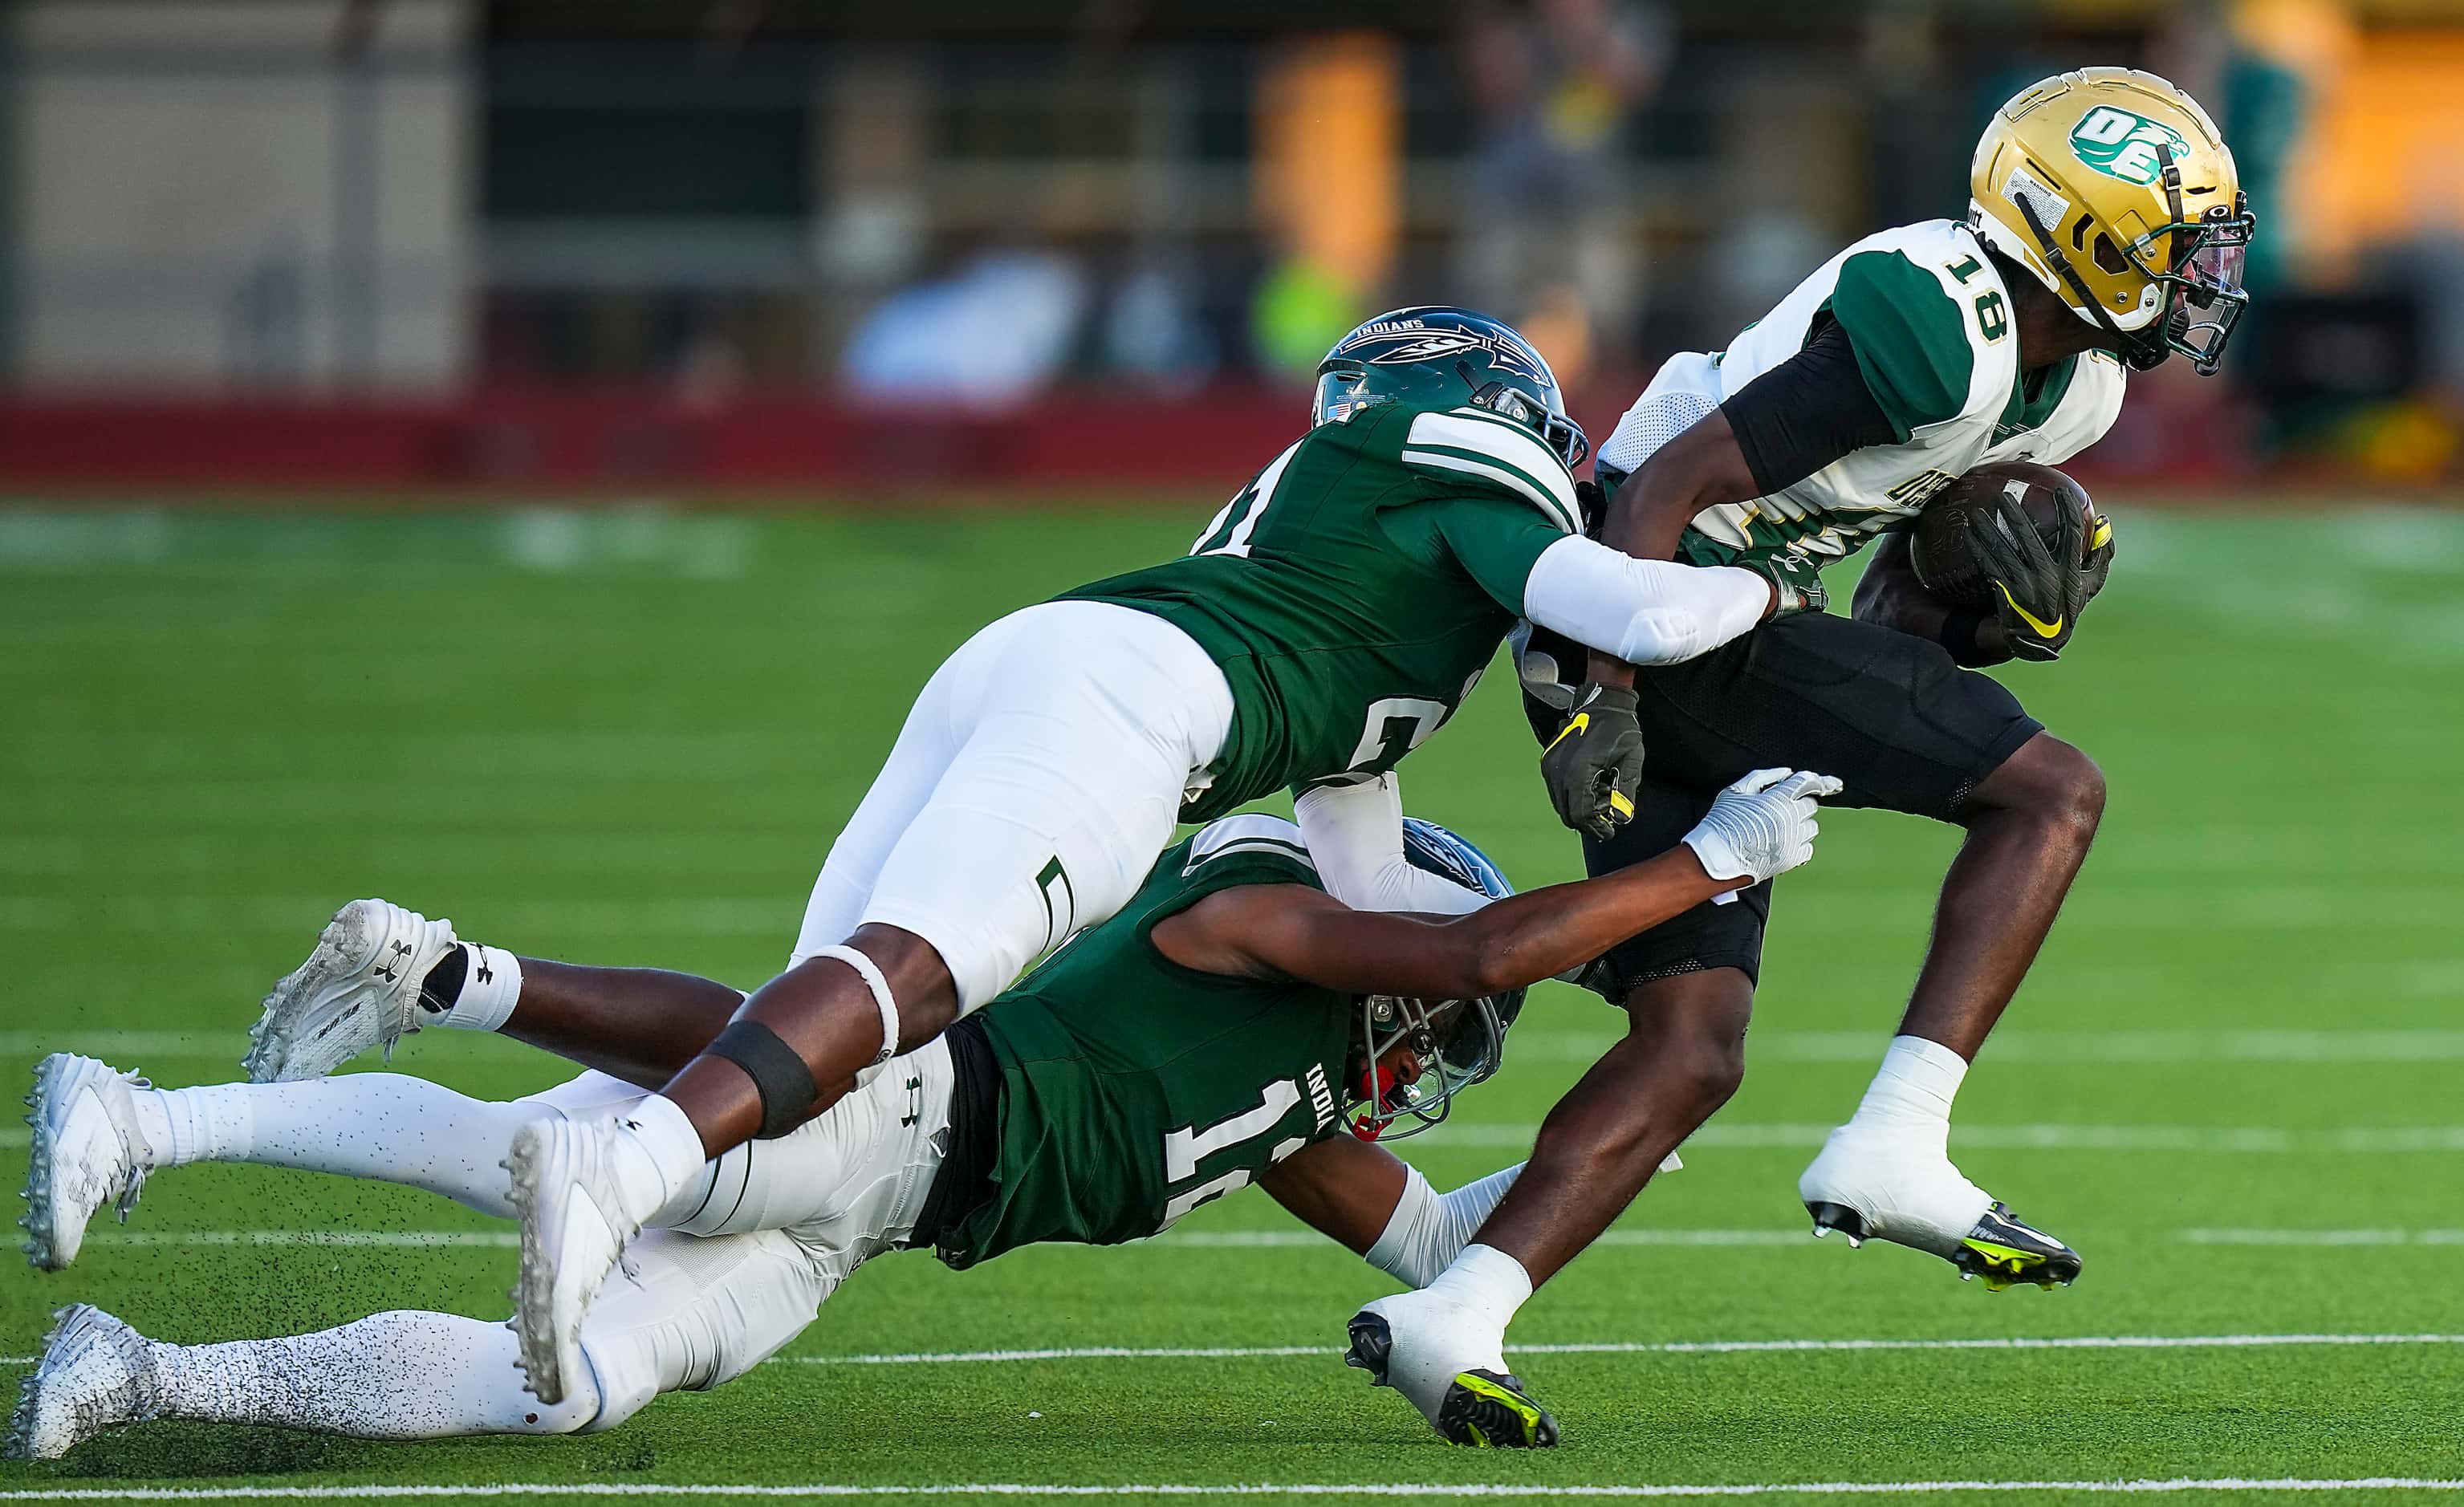 DeSoto  wide receiver Ethan Feaster (18) is brought down by Waxahachie linebacker Da'Mrion...